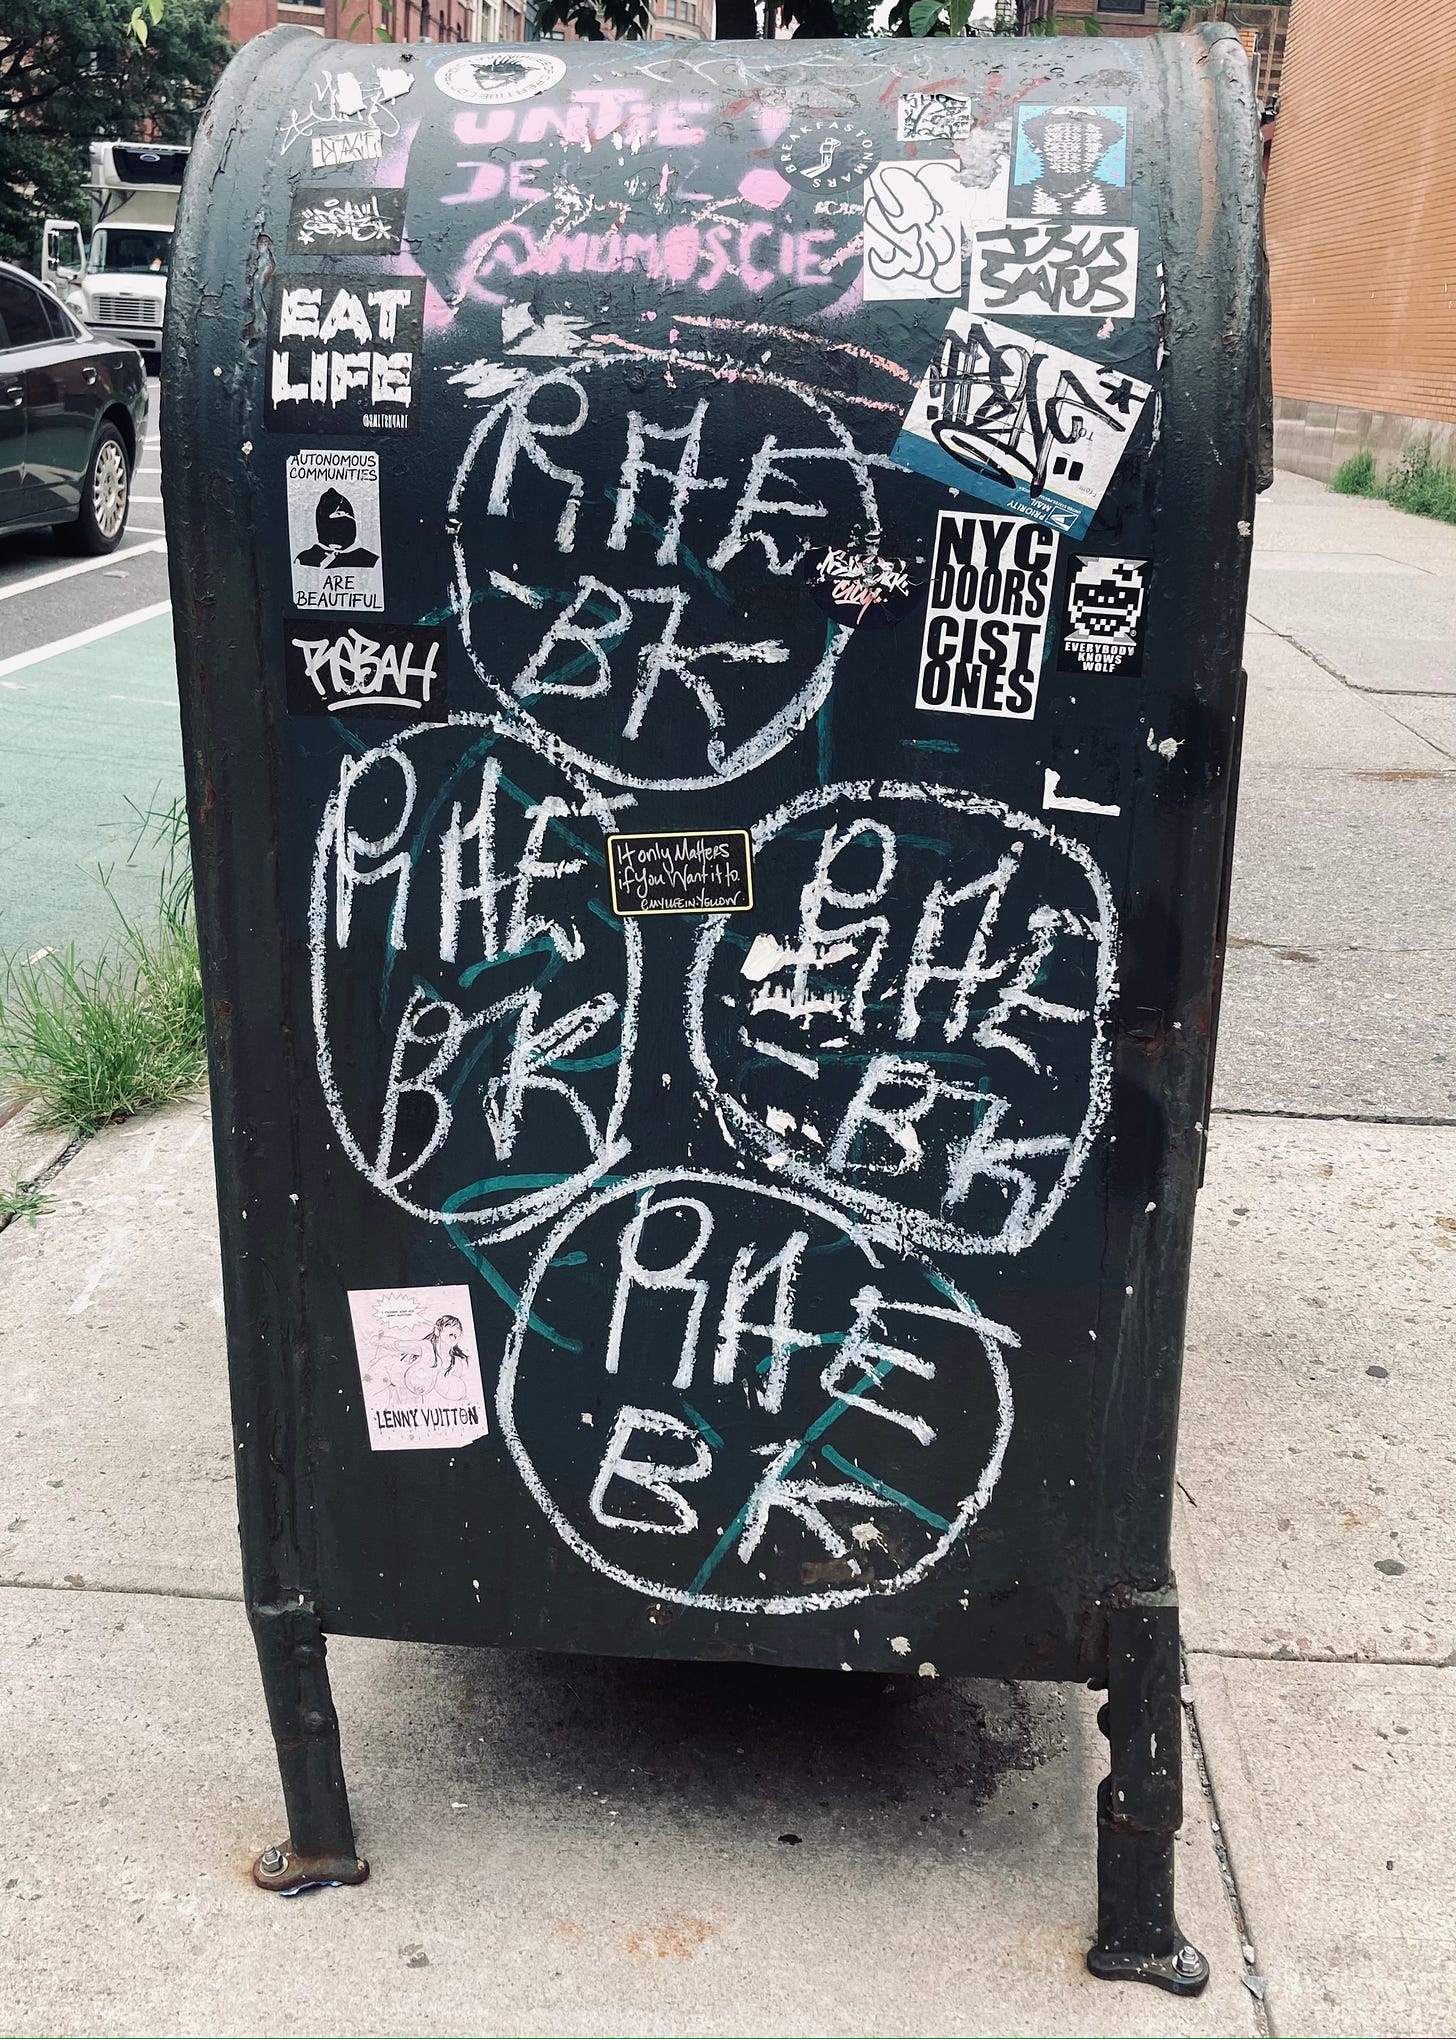 sidewalk mailbox covered with graffiti and stickers, including stickers that say Eat Life and It only matters if you want it to